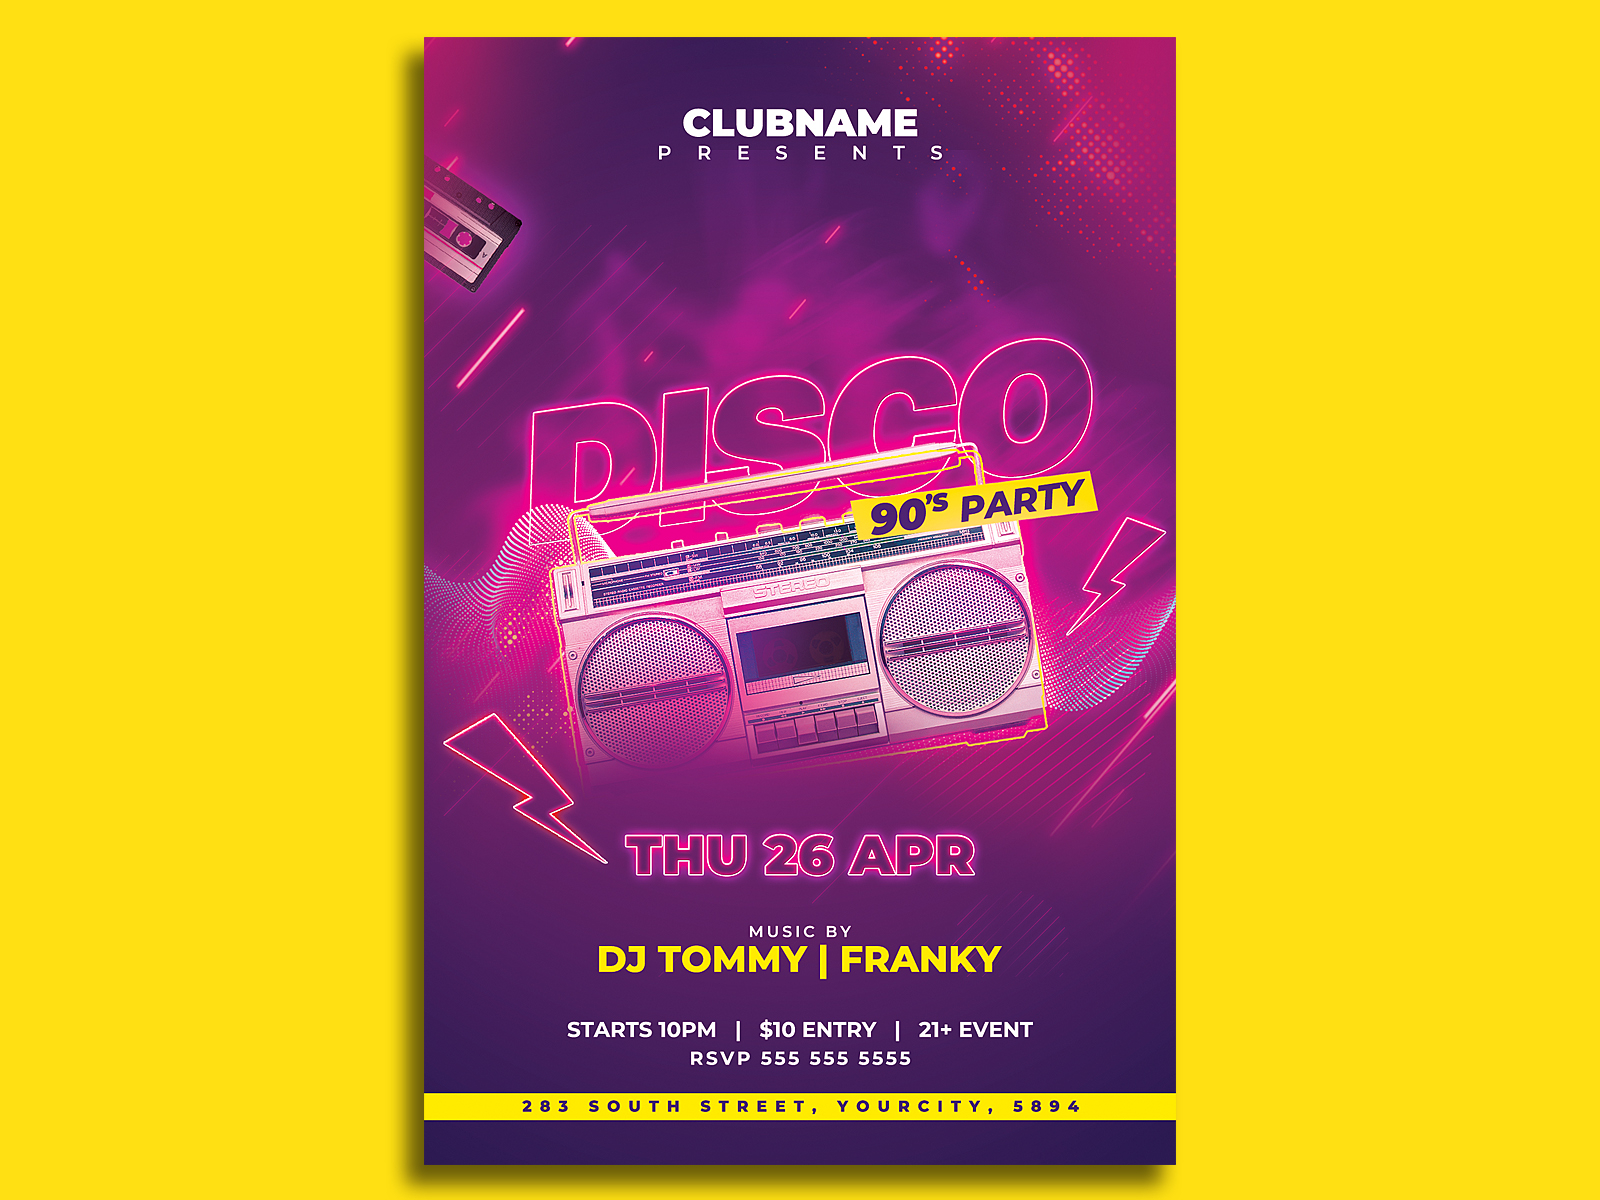 Disco 90s Party Flyer Template by Hotpin on Dribbble